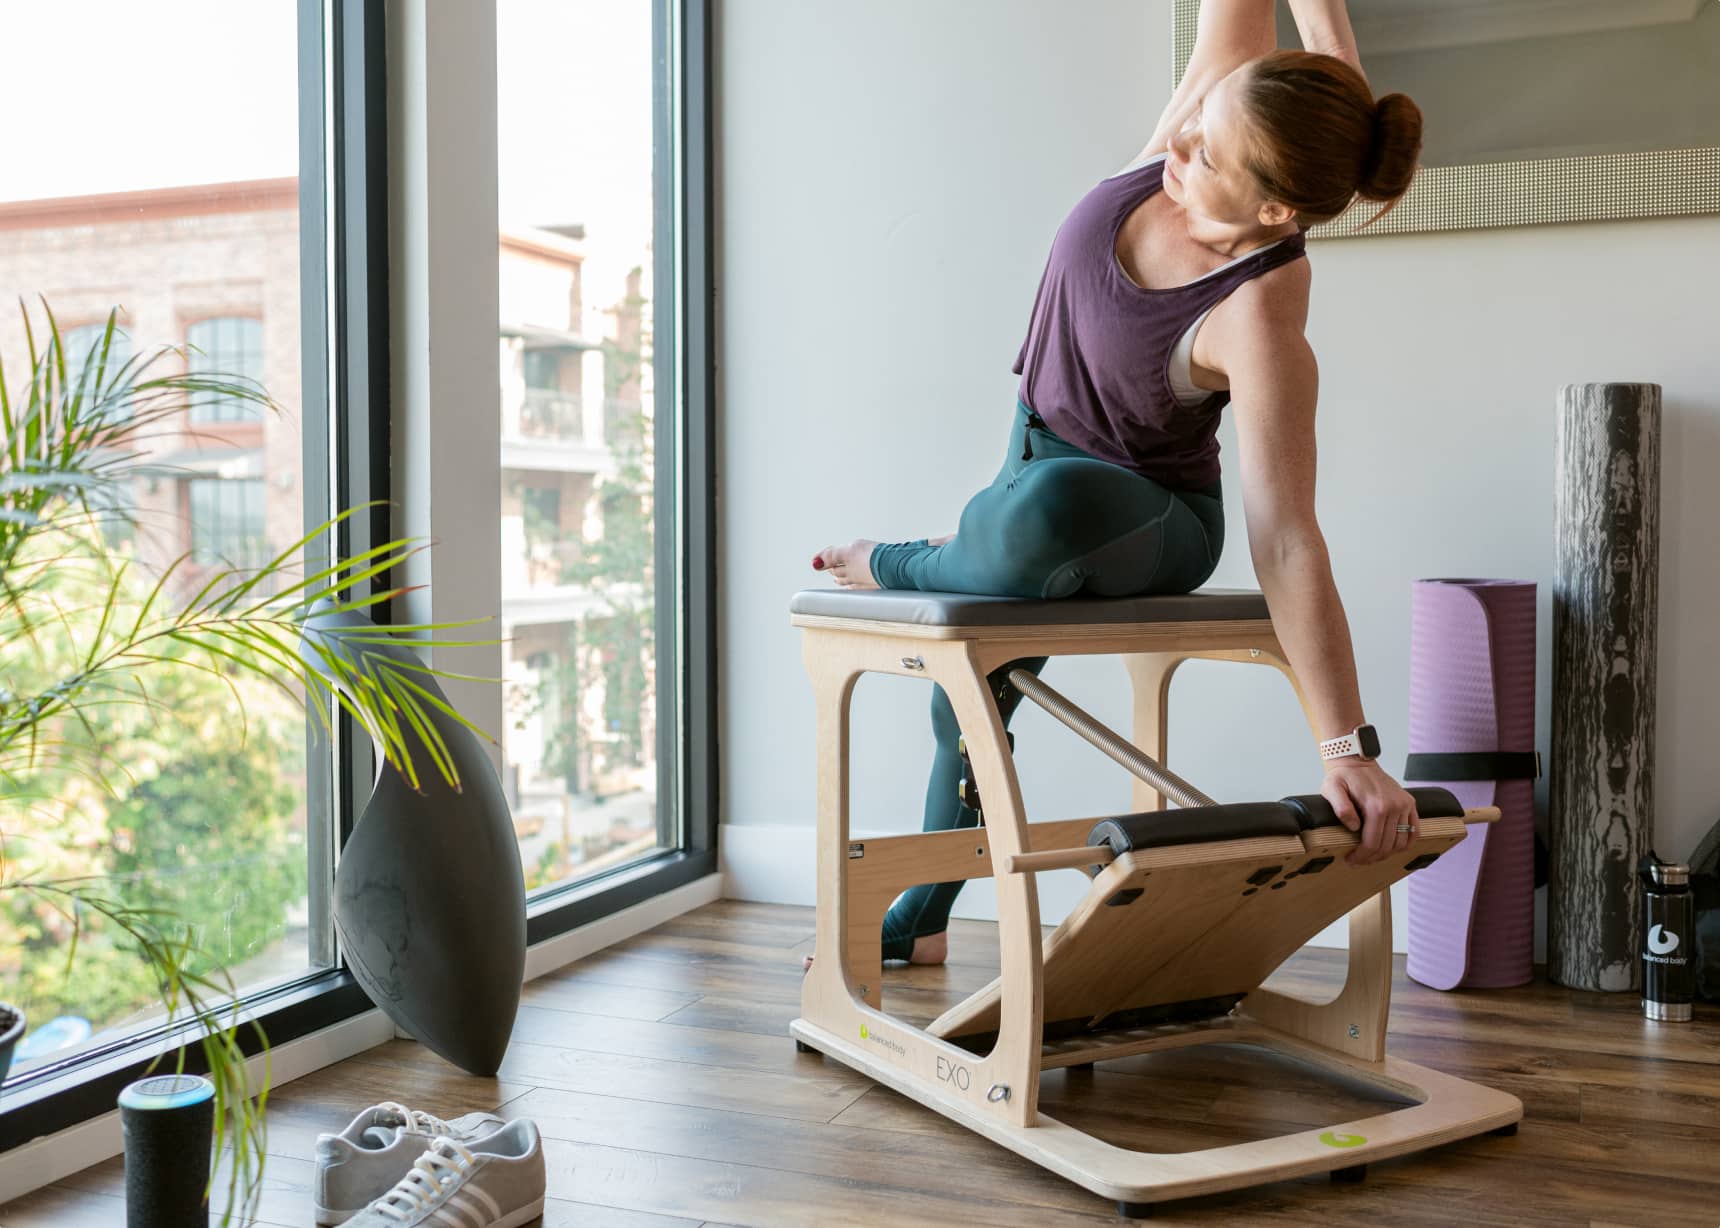 Now Streaming on Balanced Body Video: EXO Chair + Reformer Workout